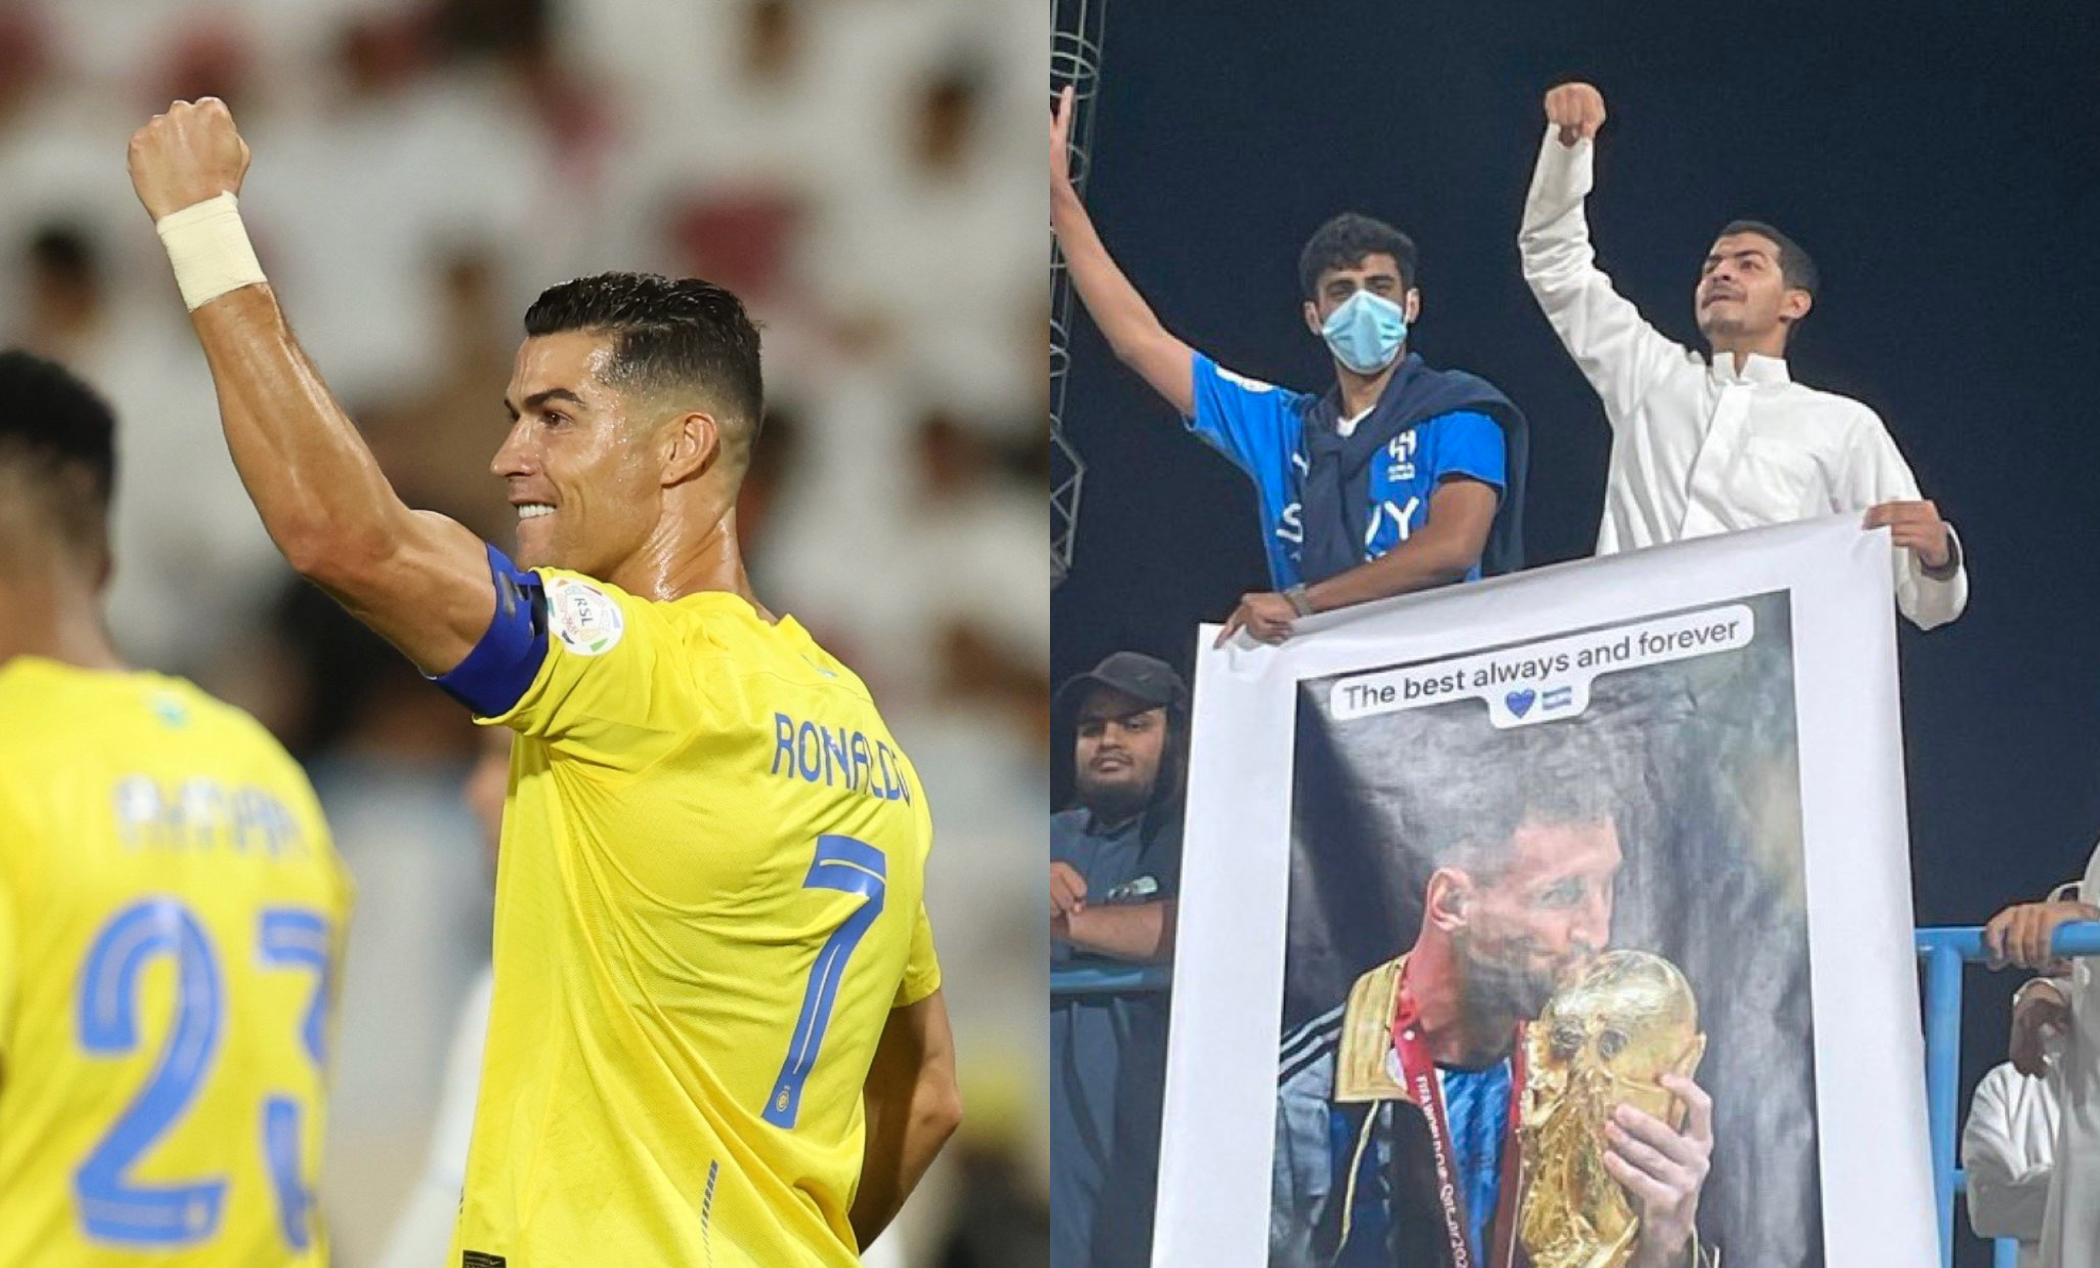 Saudi Arabia: Lionel Messi banner during Al-Nassr’s win over Al-Akhdoud is going viral; Here’s why